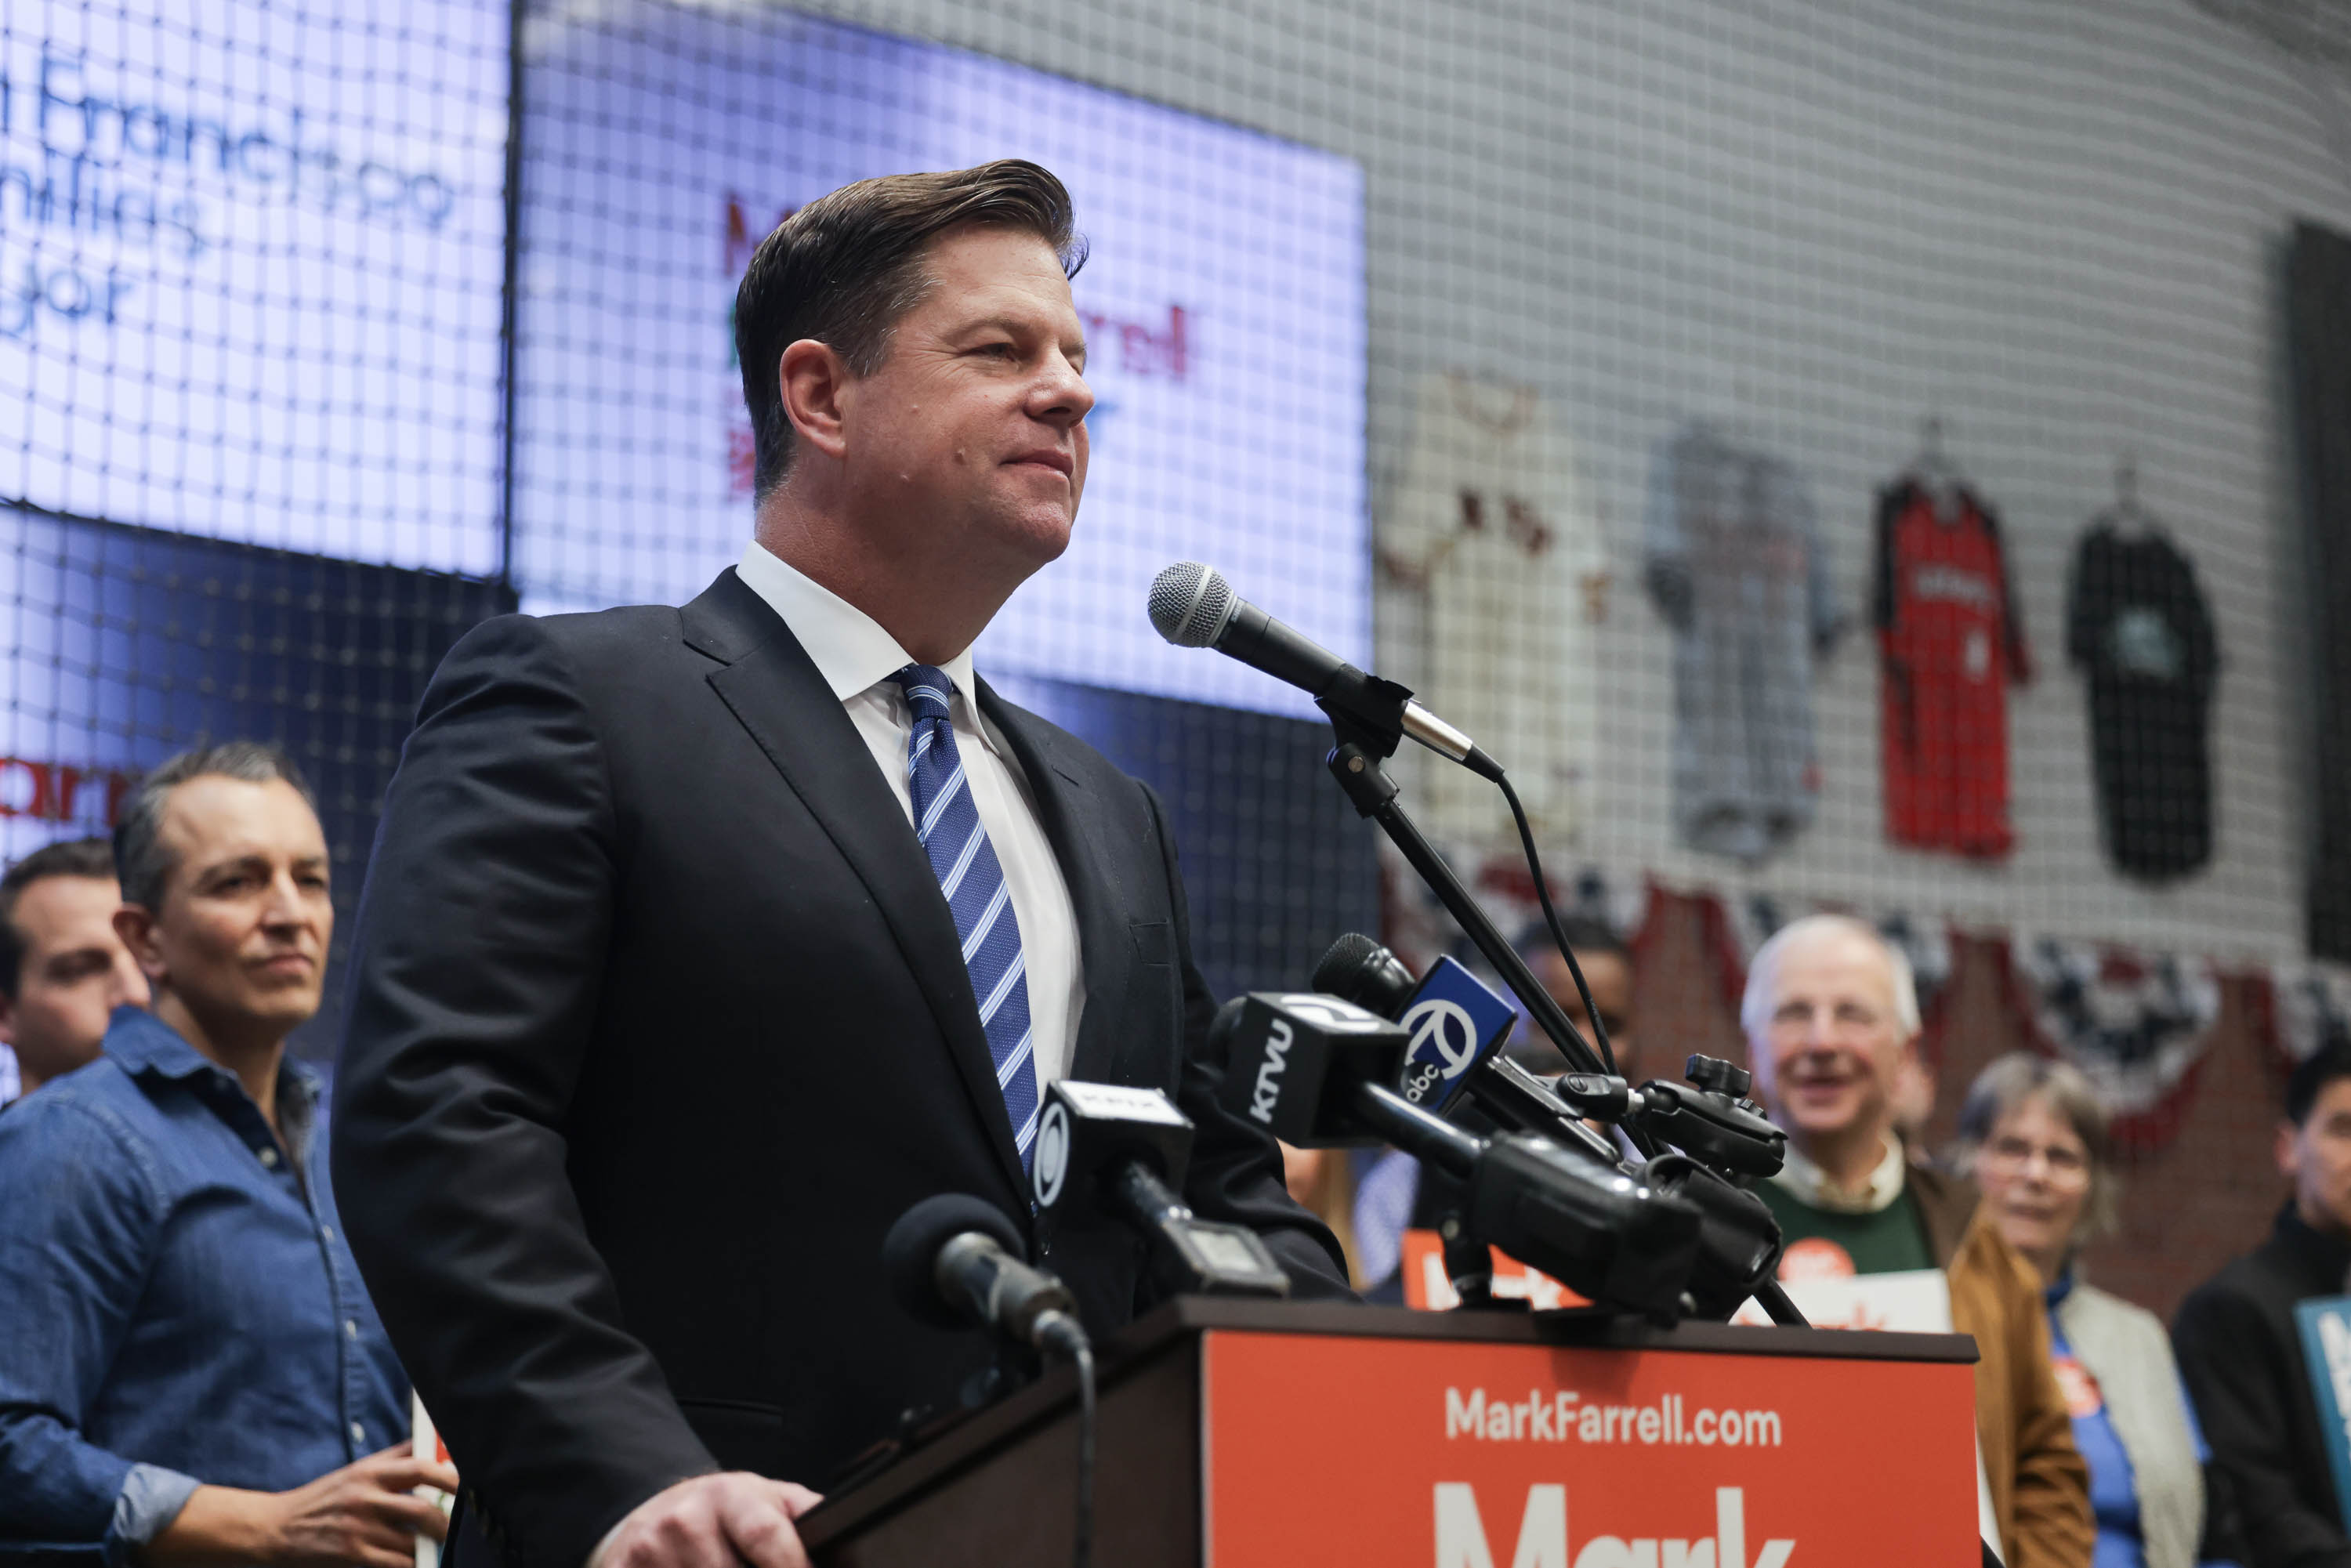 Mark Farrell in a suit speaks at a podium with microphones, a campaign banner in front, and onlookers behind him.